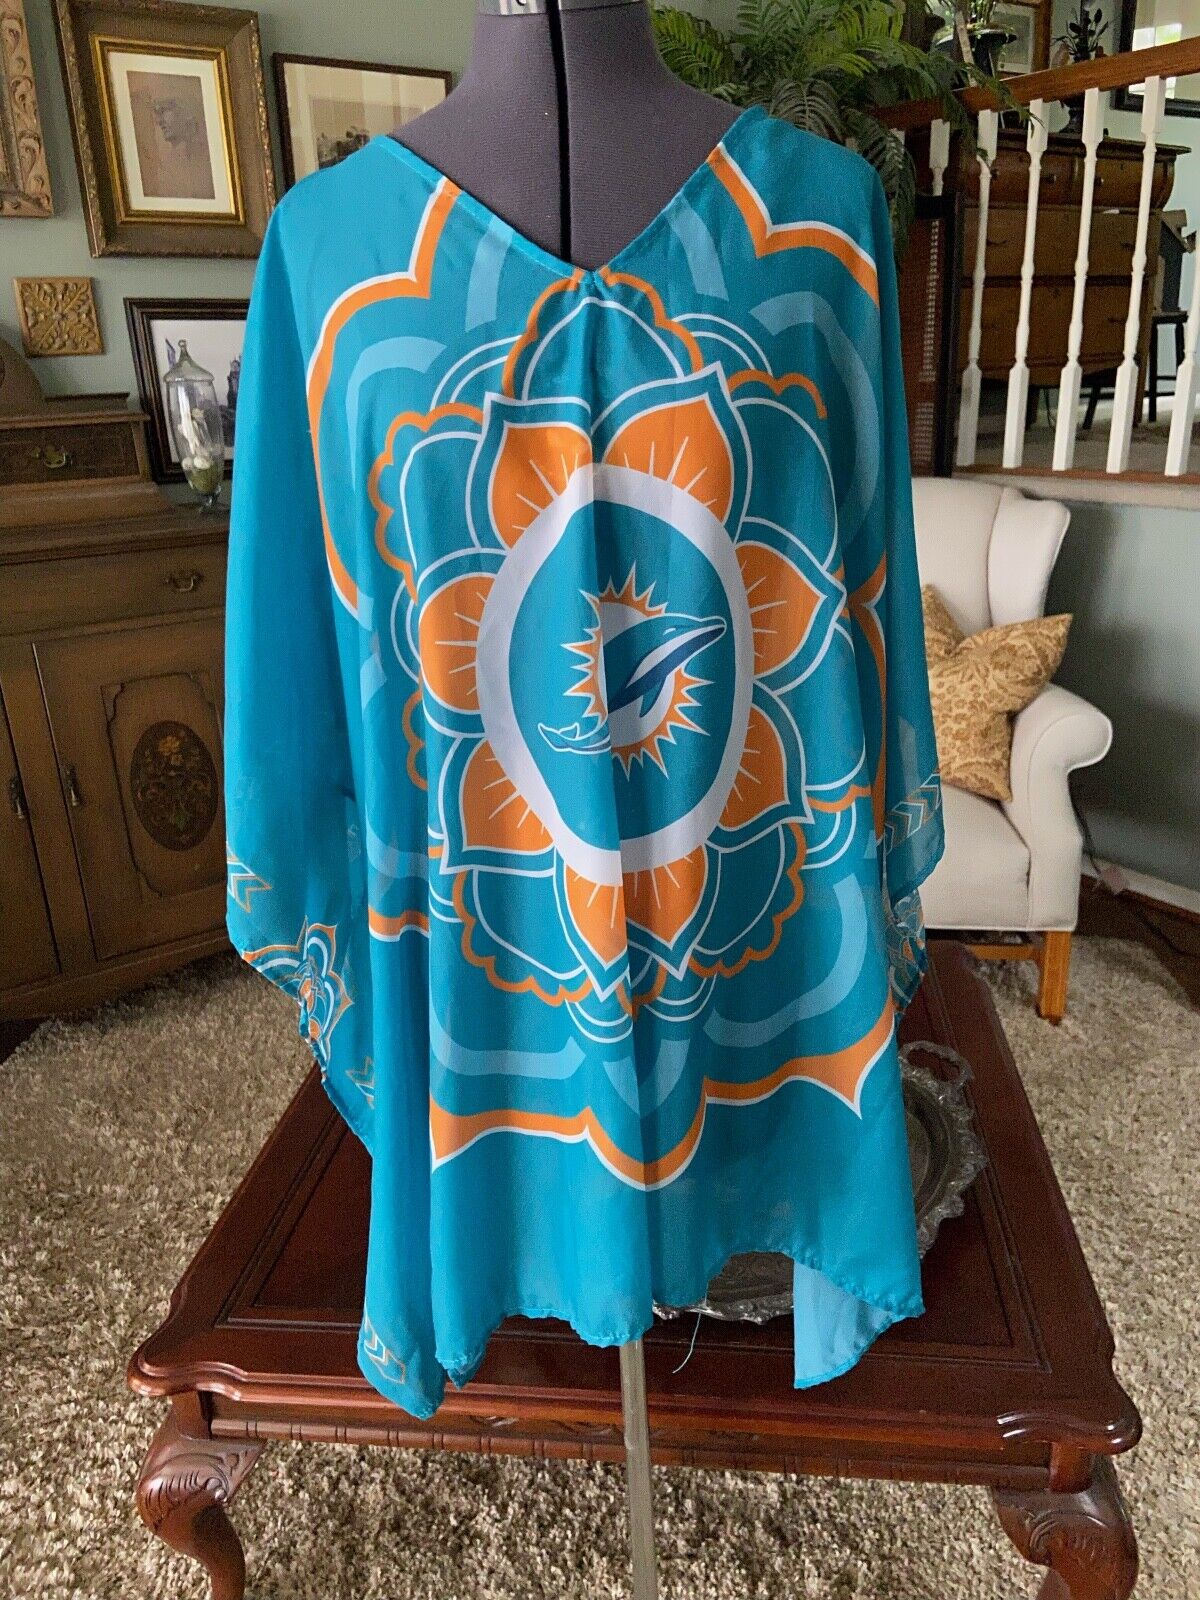 nfl miami dolphins clothing